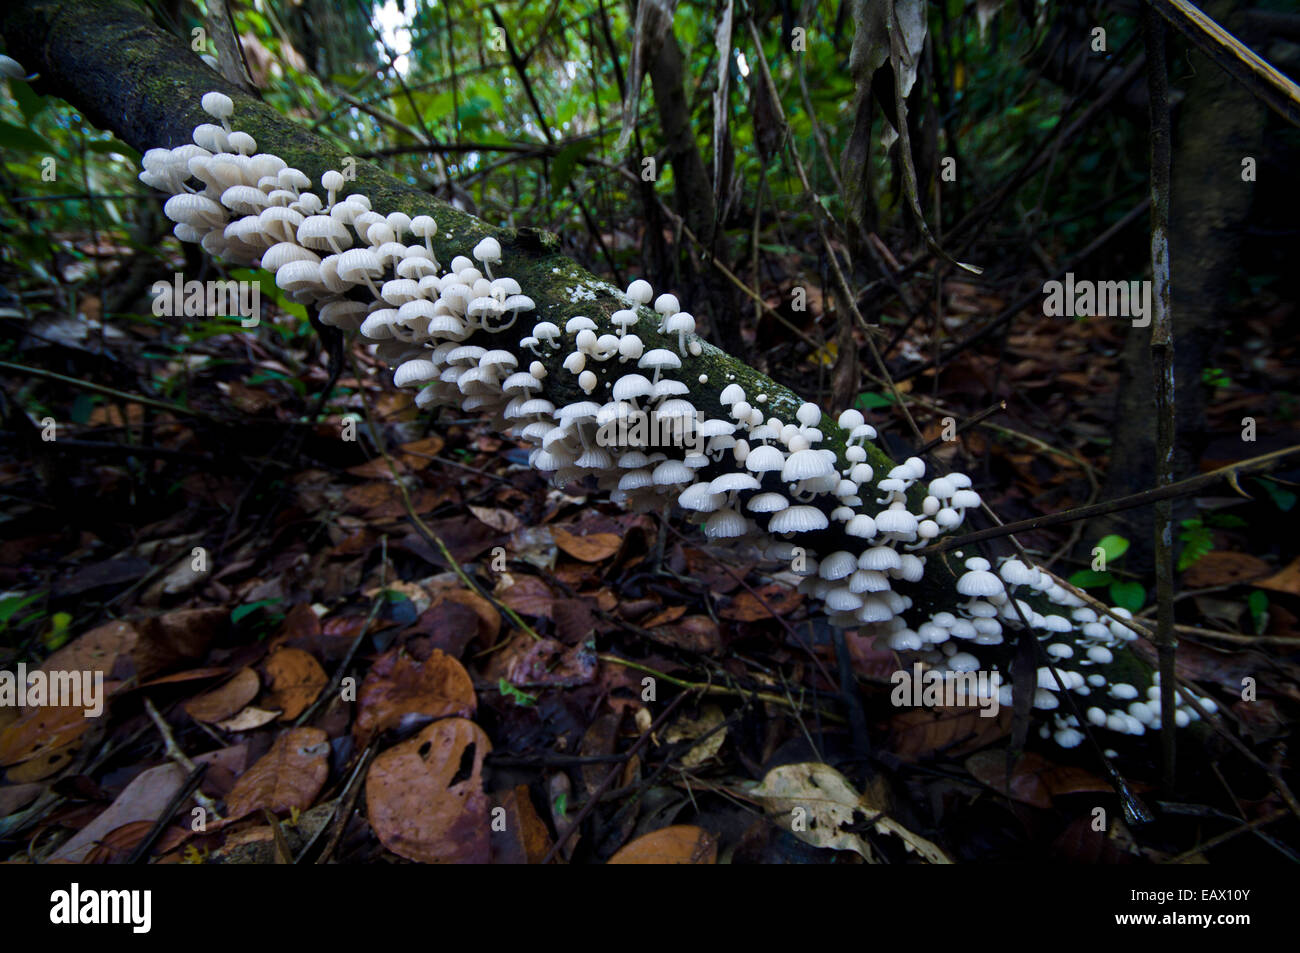 A colony of umbrella-shaped fungi growing on a tree trunk above leaf litter on the rainforest floor. Stock Photo